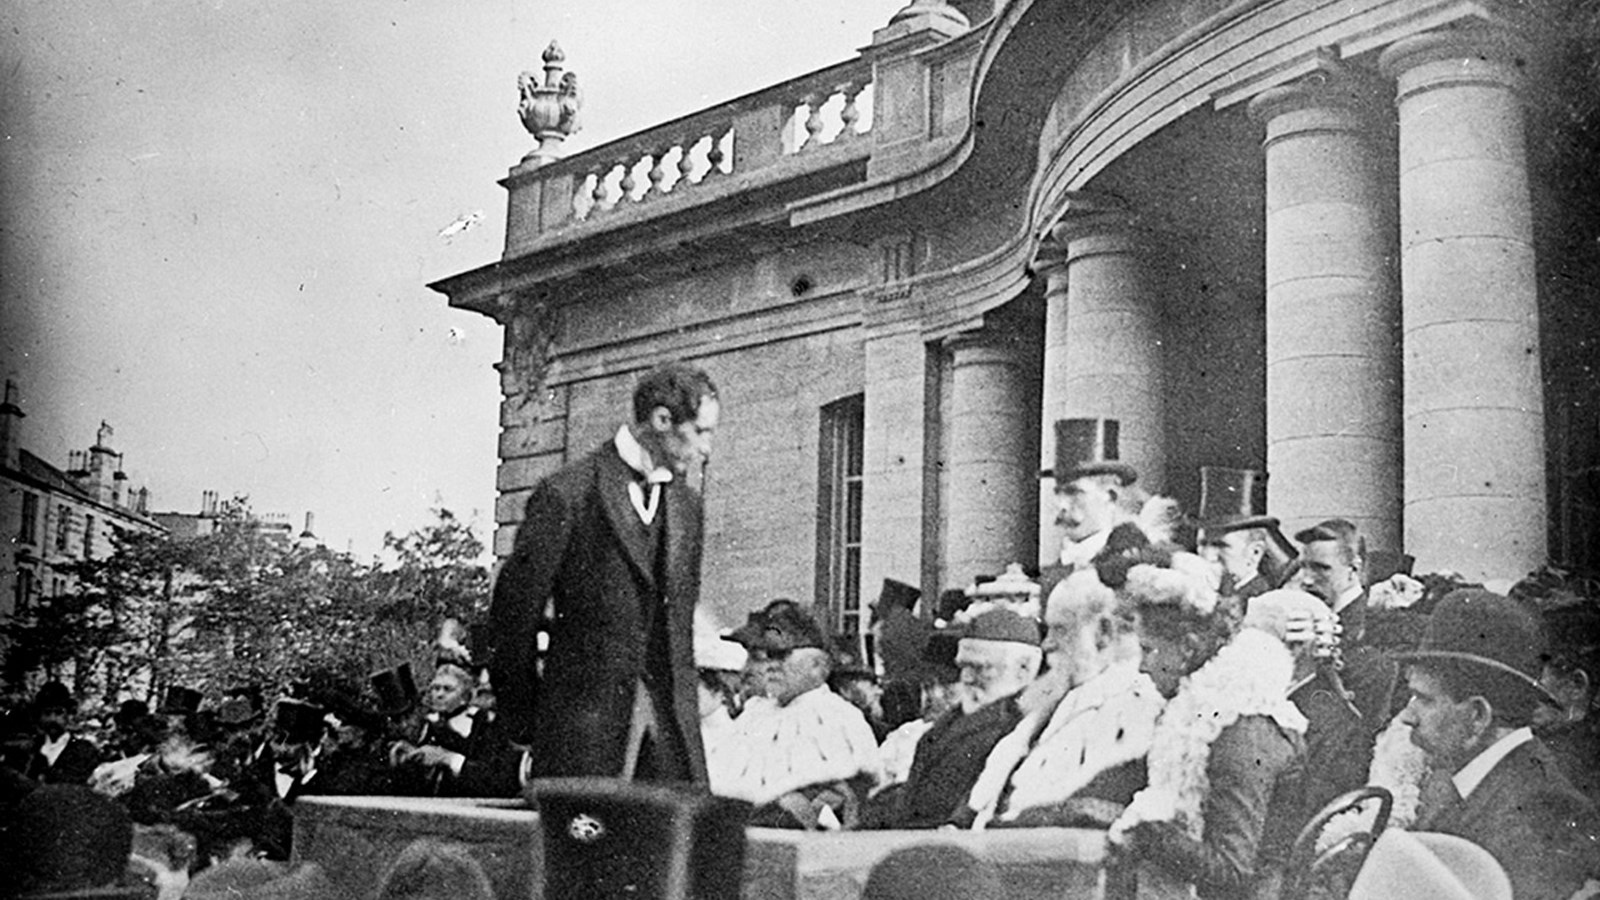 A black and white photograph of a crowd of people standing outside a historical building dressed in suites and dresses and many wearing hats including top hats.